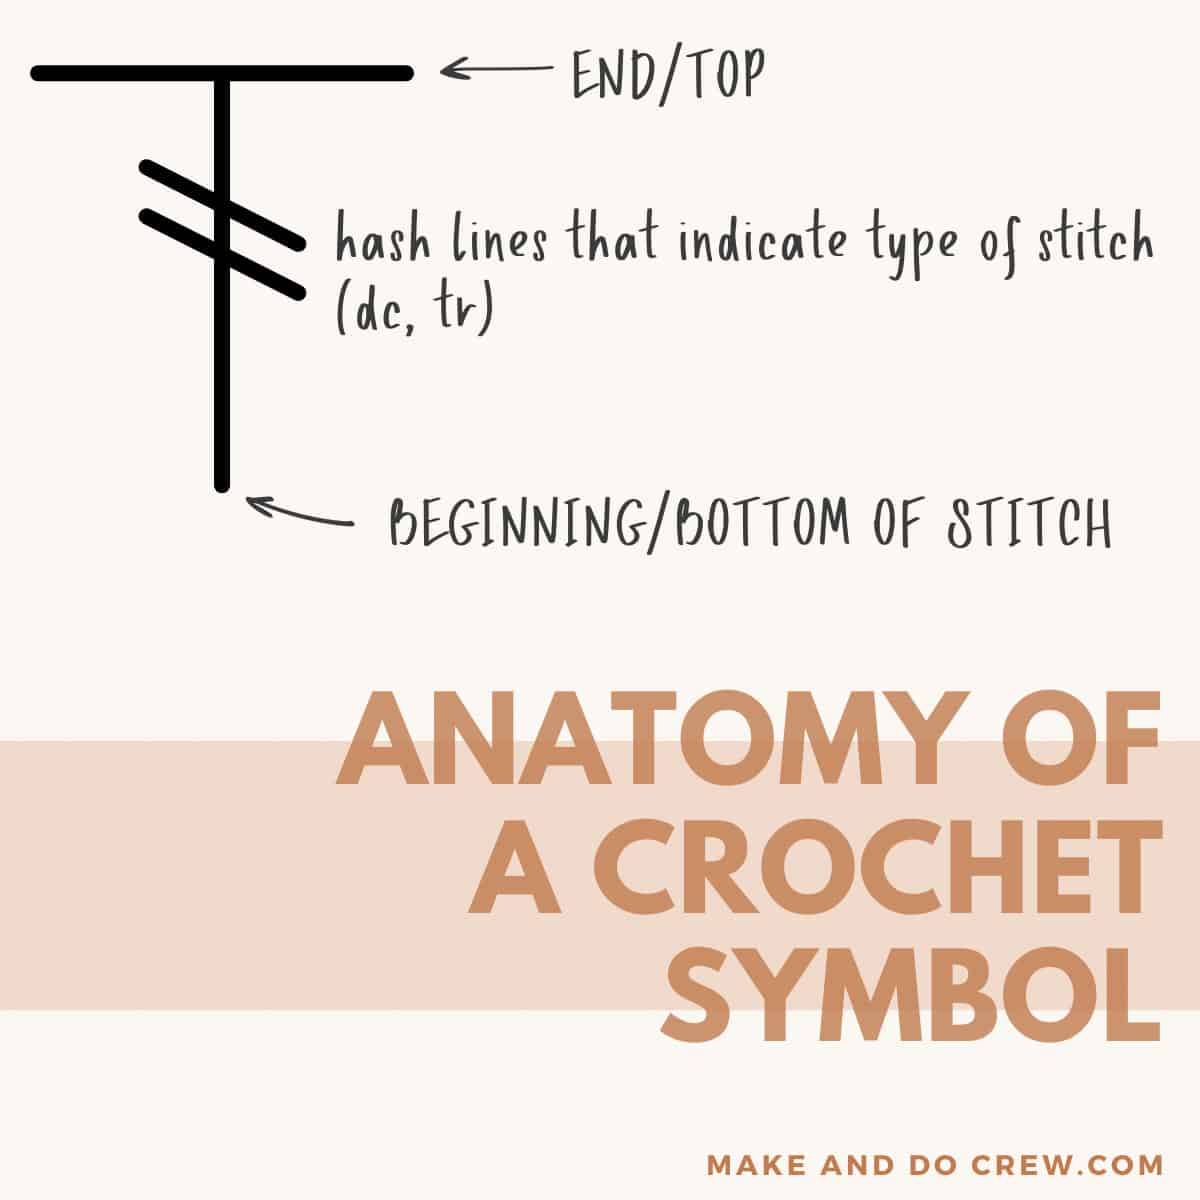 Explanation of what a crochet symbol means.